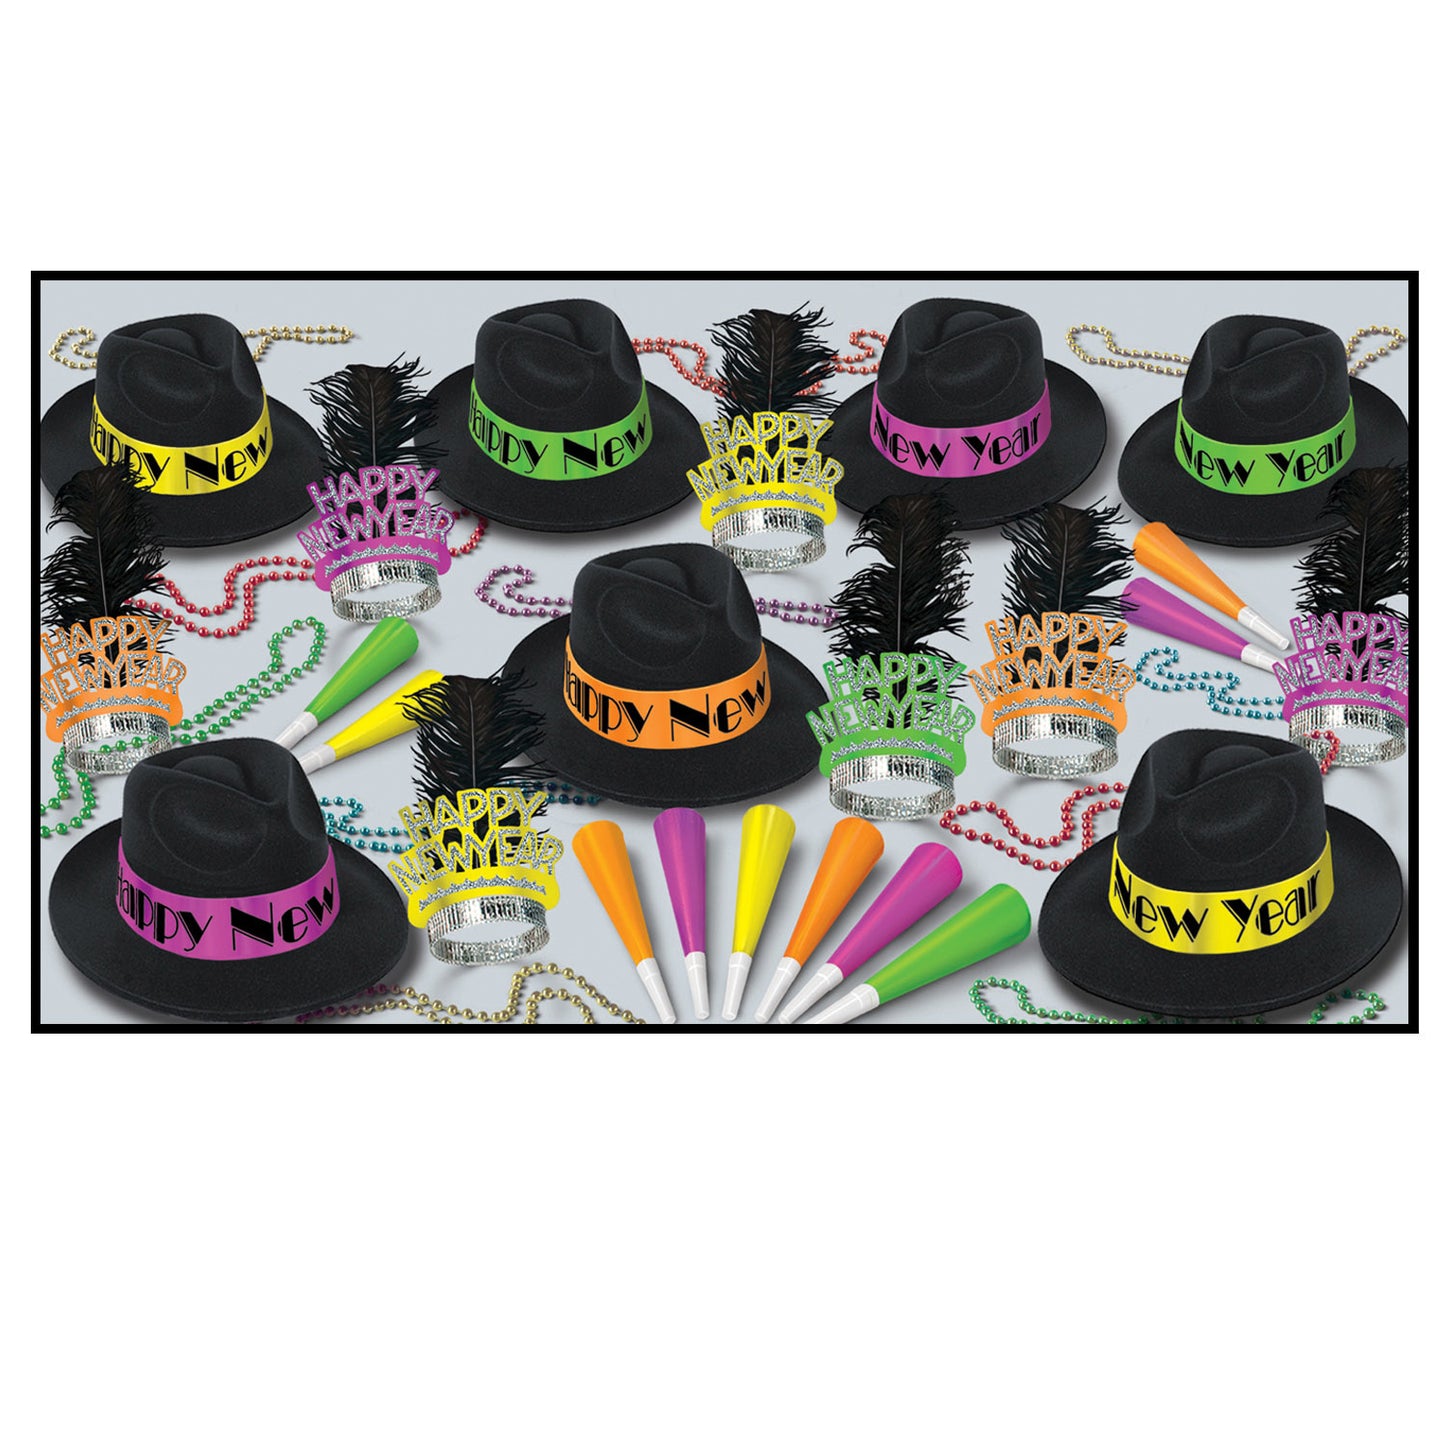 NY Party Kit: Neon Swing - Assortment for 50